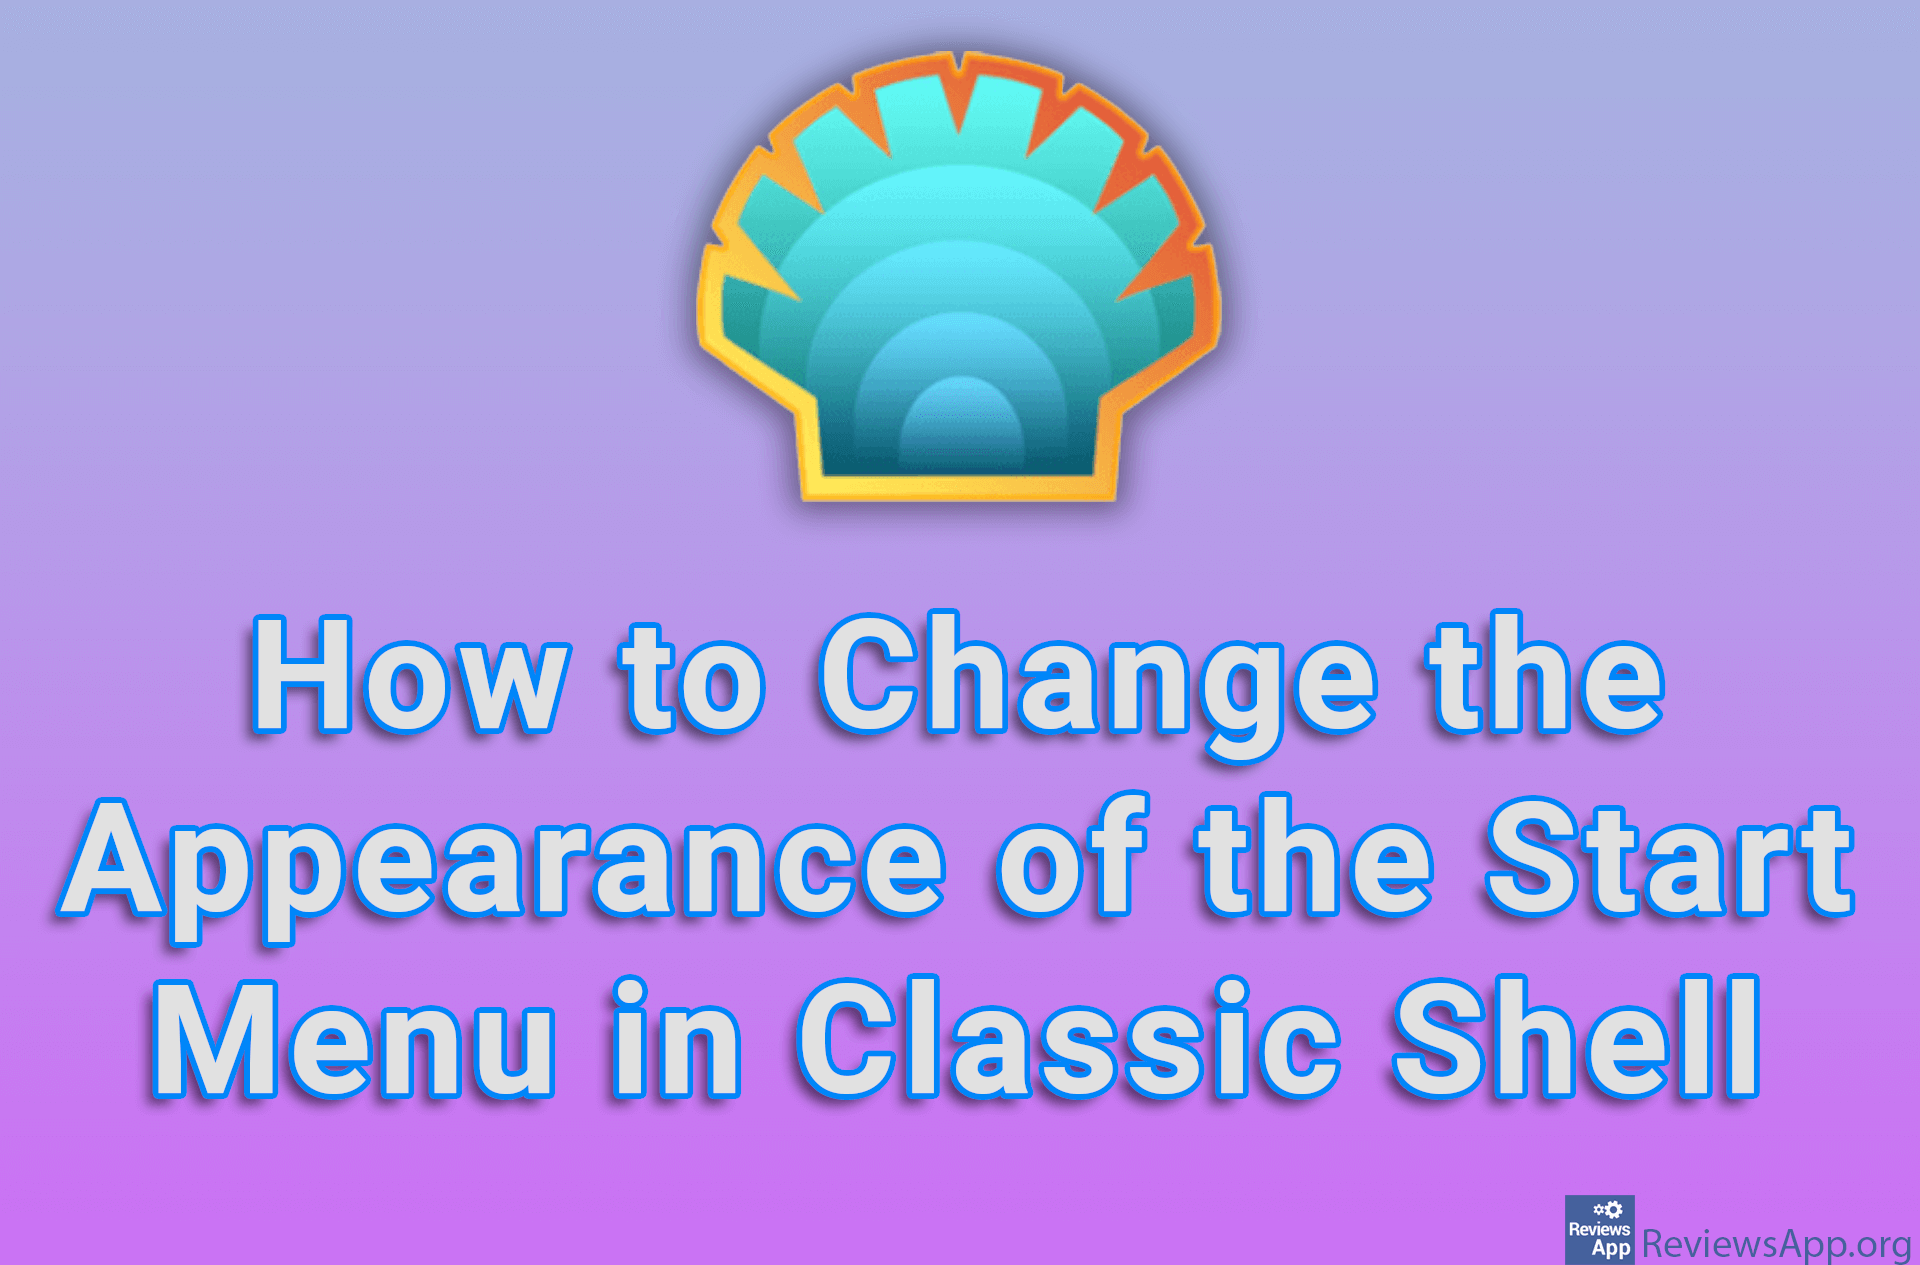 How to Change the Appearance of the Start Menu in Classic Shell